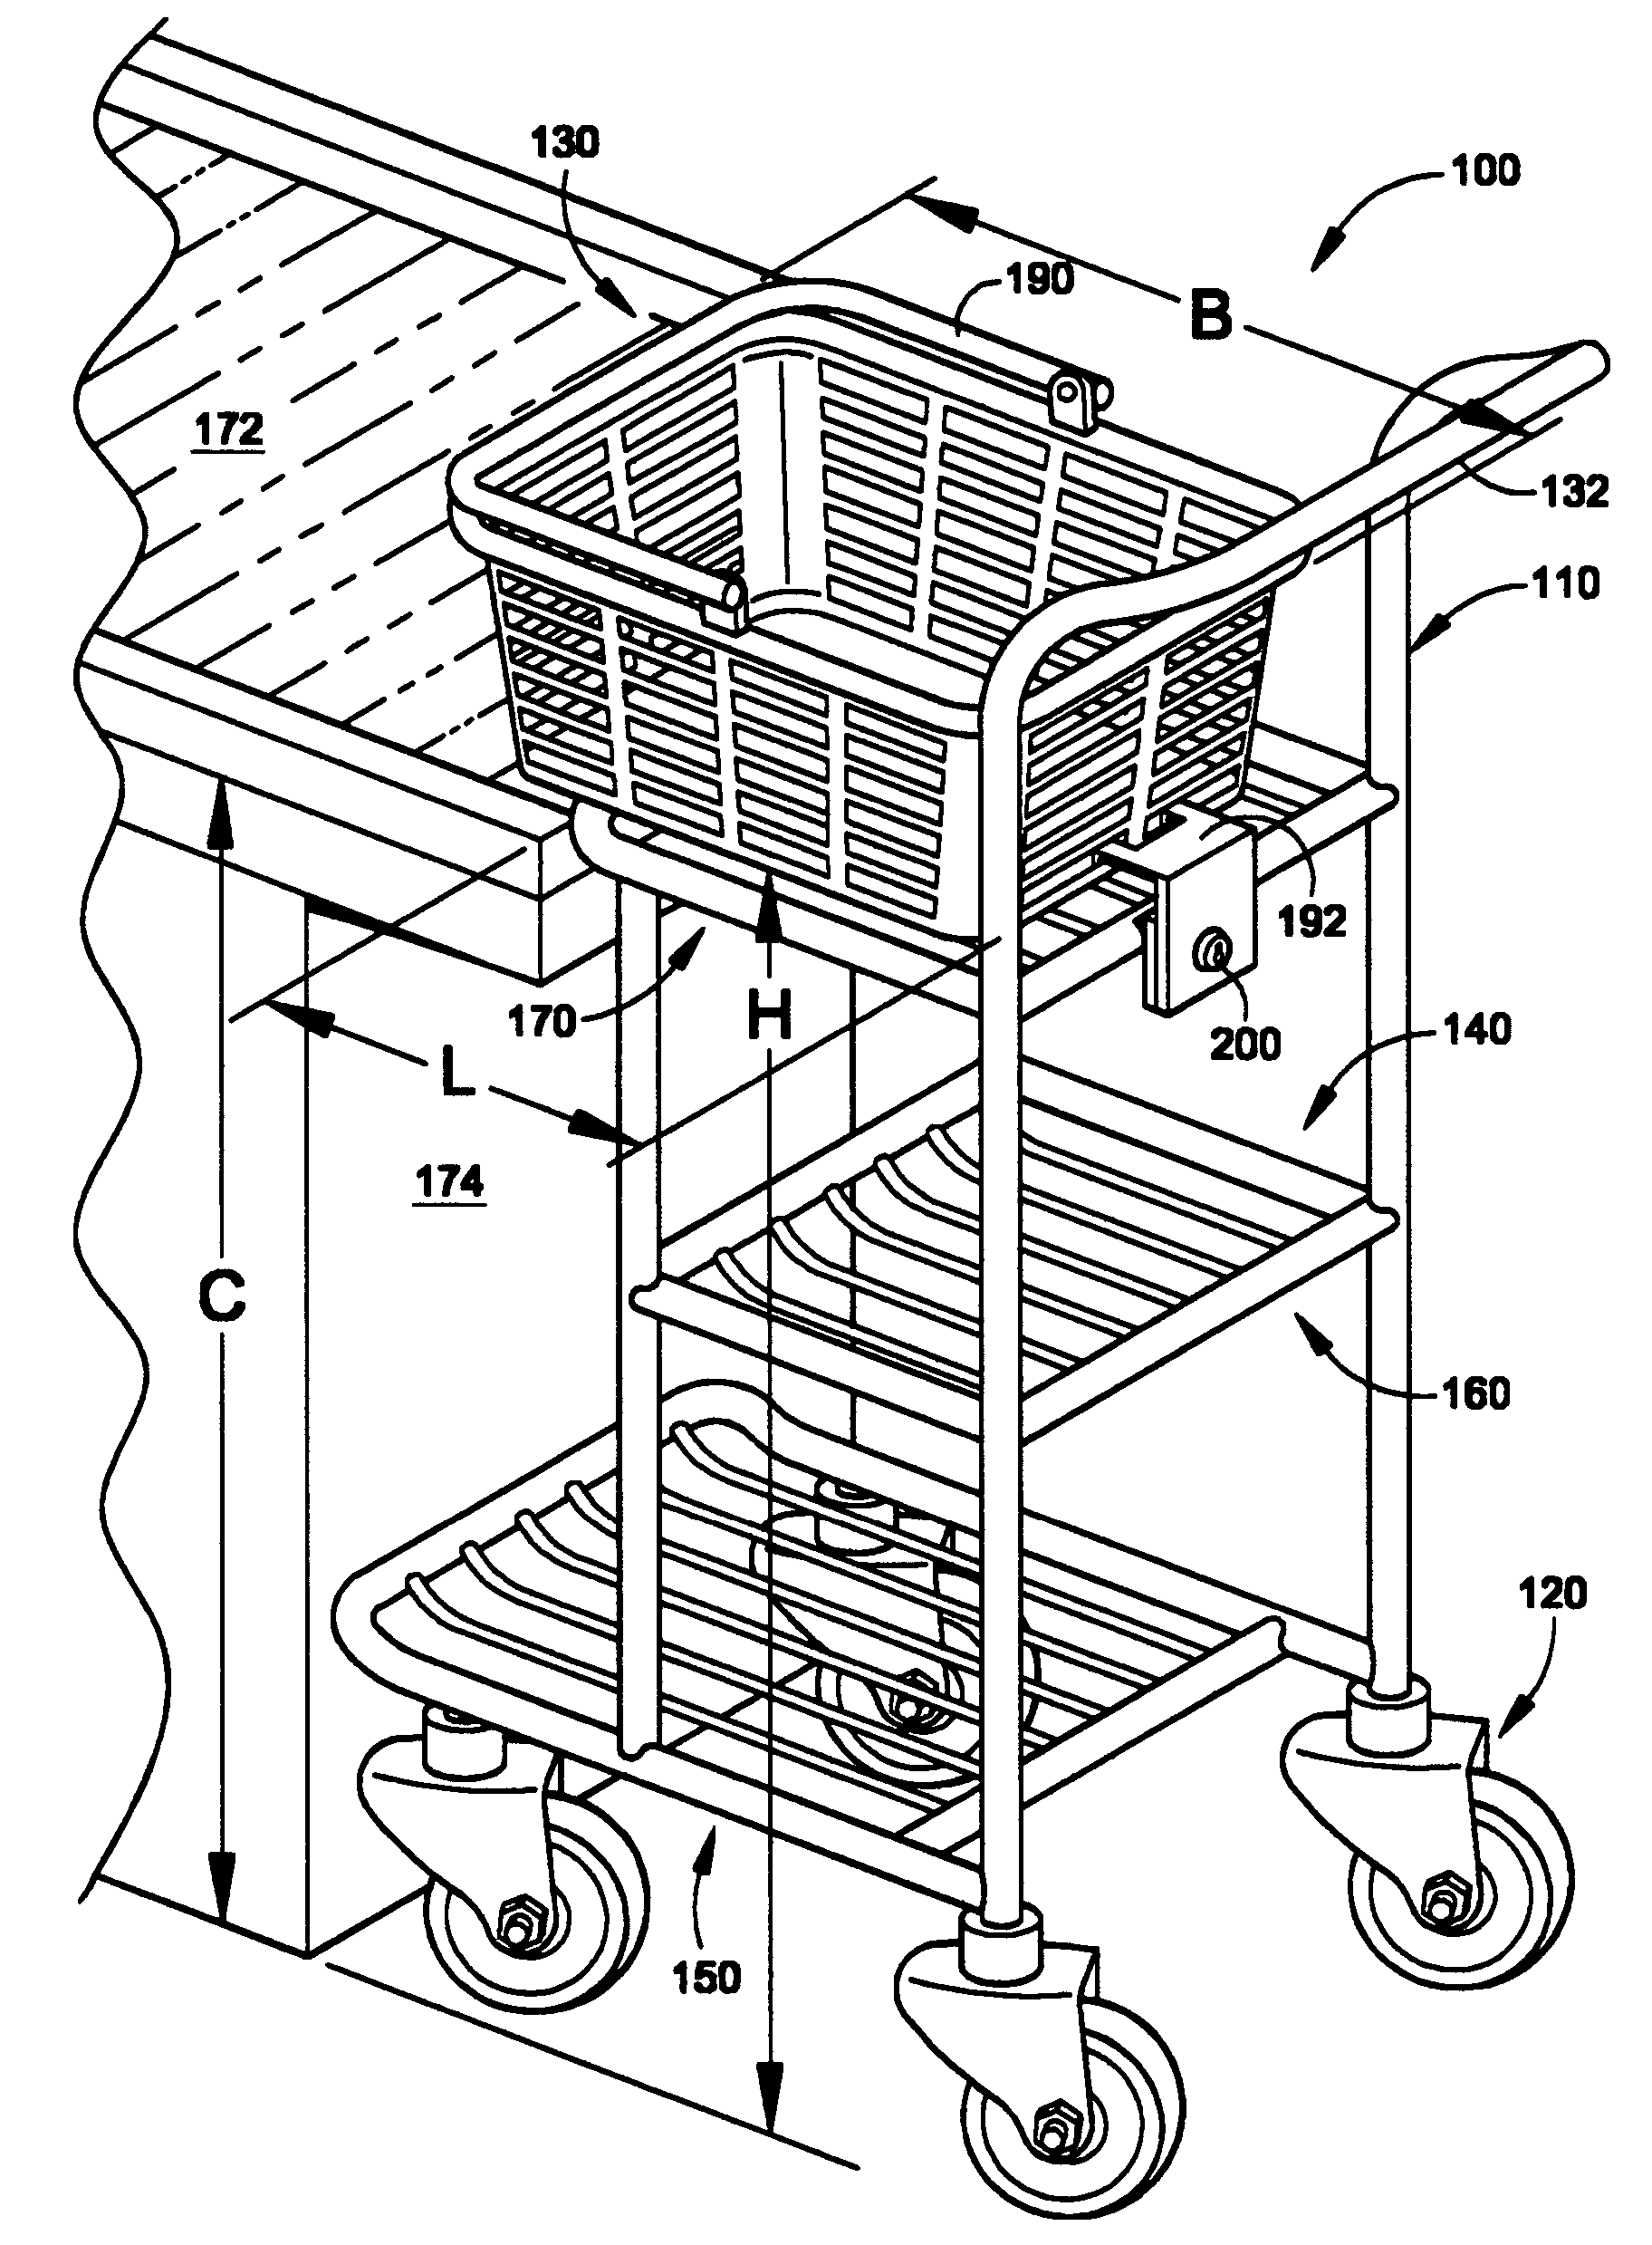 Shopping cart and method of use